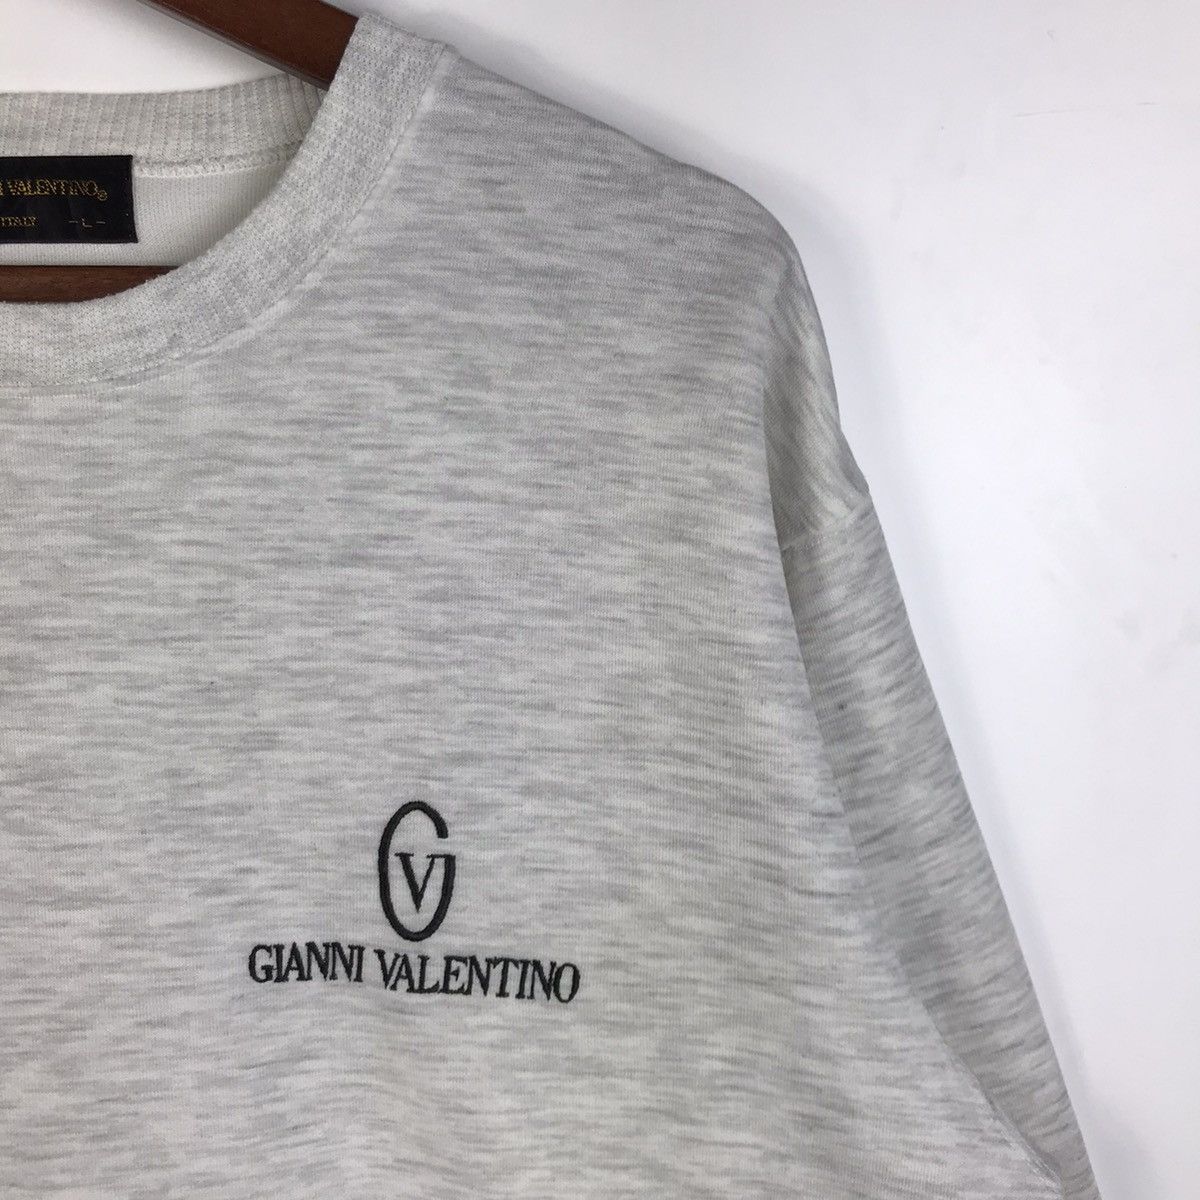 Gianni Valentino Italy Sweatshirt Spell out Embroidered Logo - 2